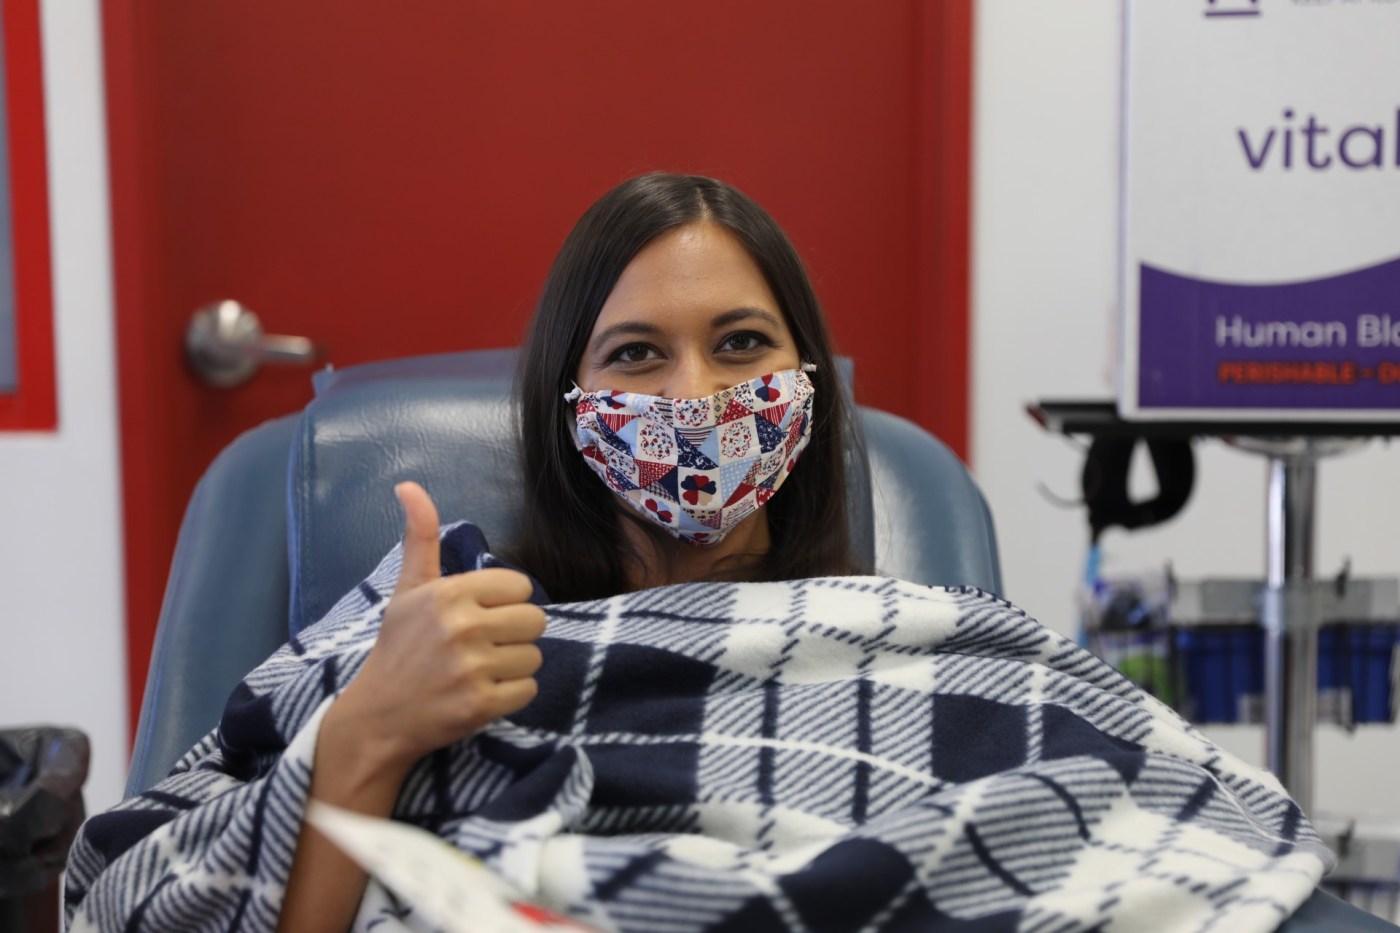 Dr. Parisa Khan is a clinical pharmacist who specializes in infectious diseases at the VA Southern Nevada Healthcare System. As a recovered COVID-19 patient, she donated her convalescent plasma to help others struggling with the illness.